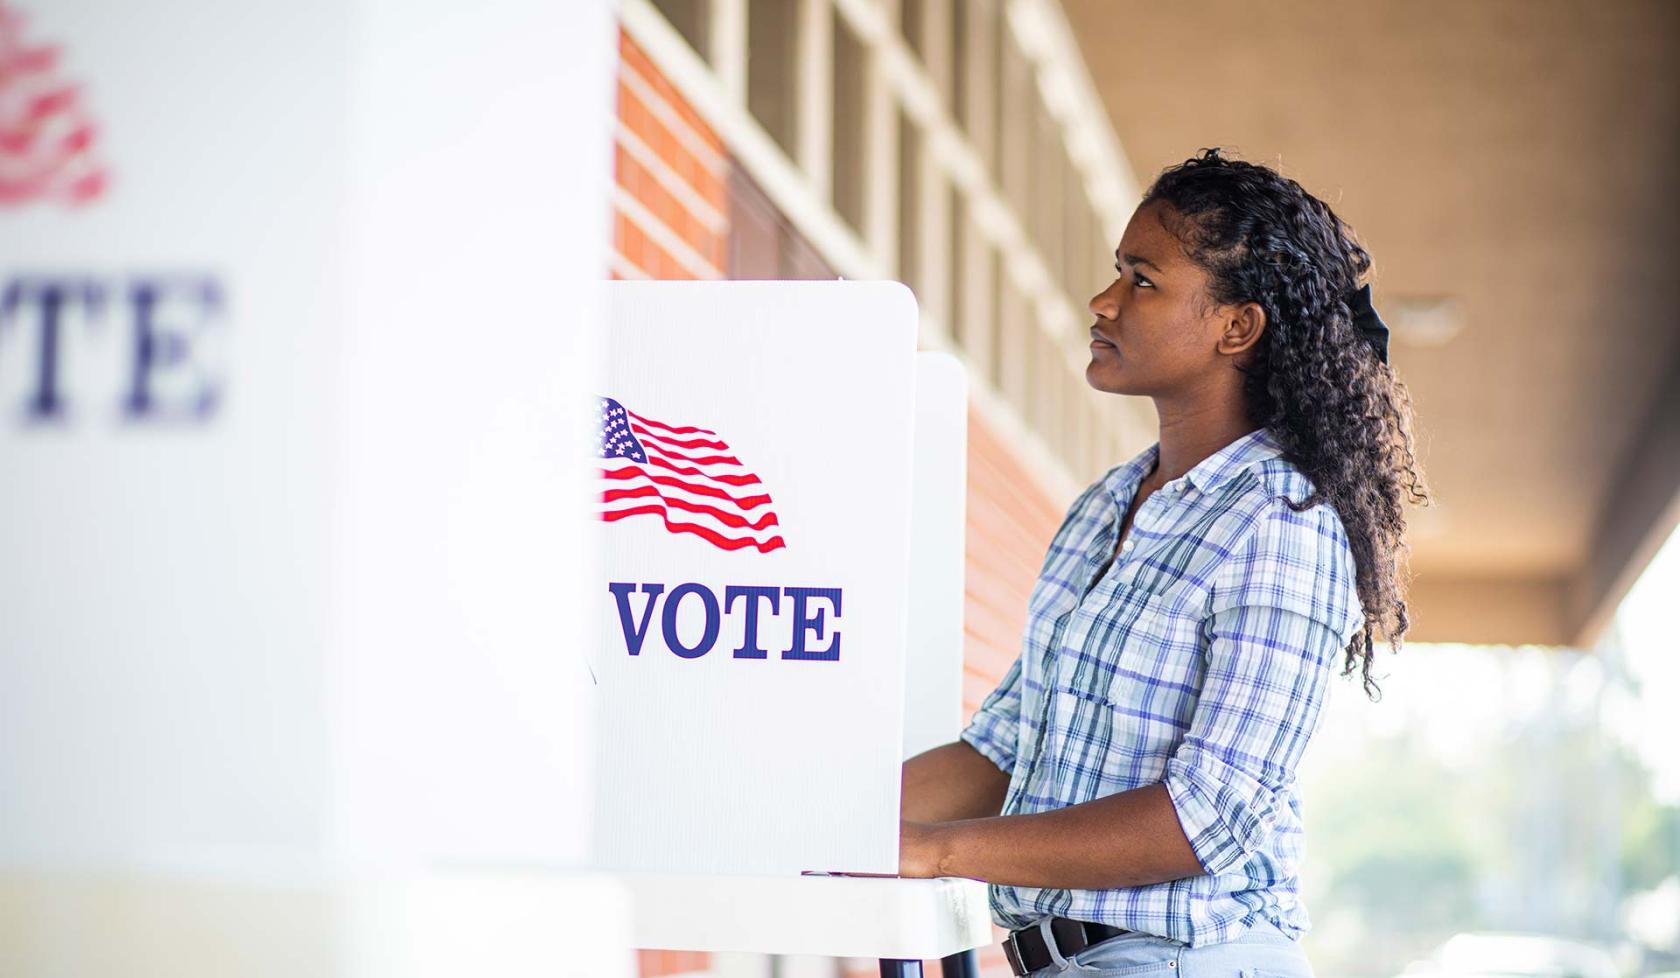 Young Black Female at Voting Booth